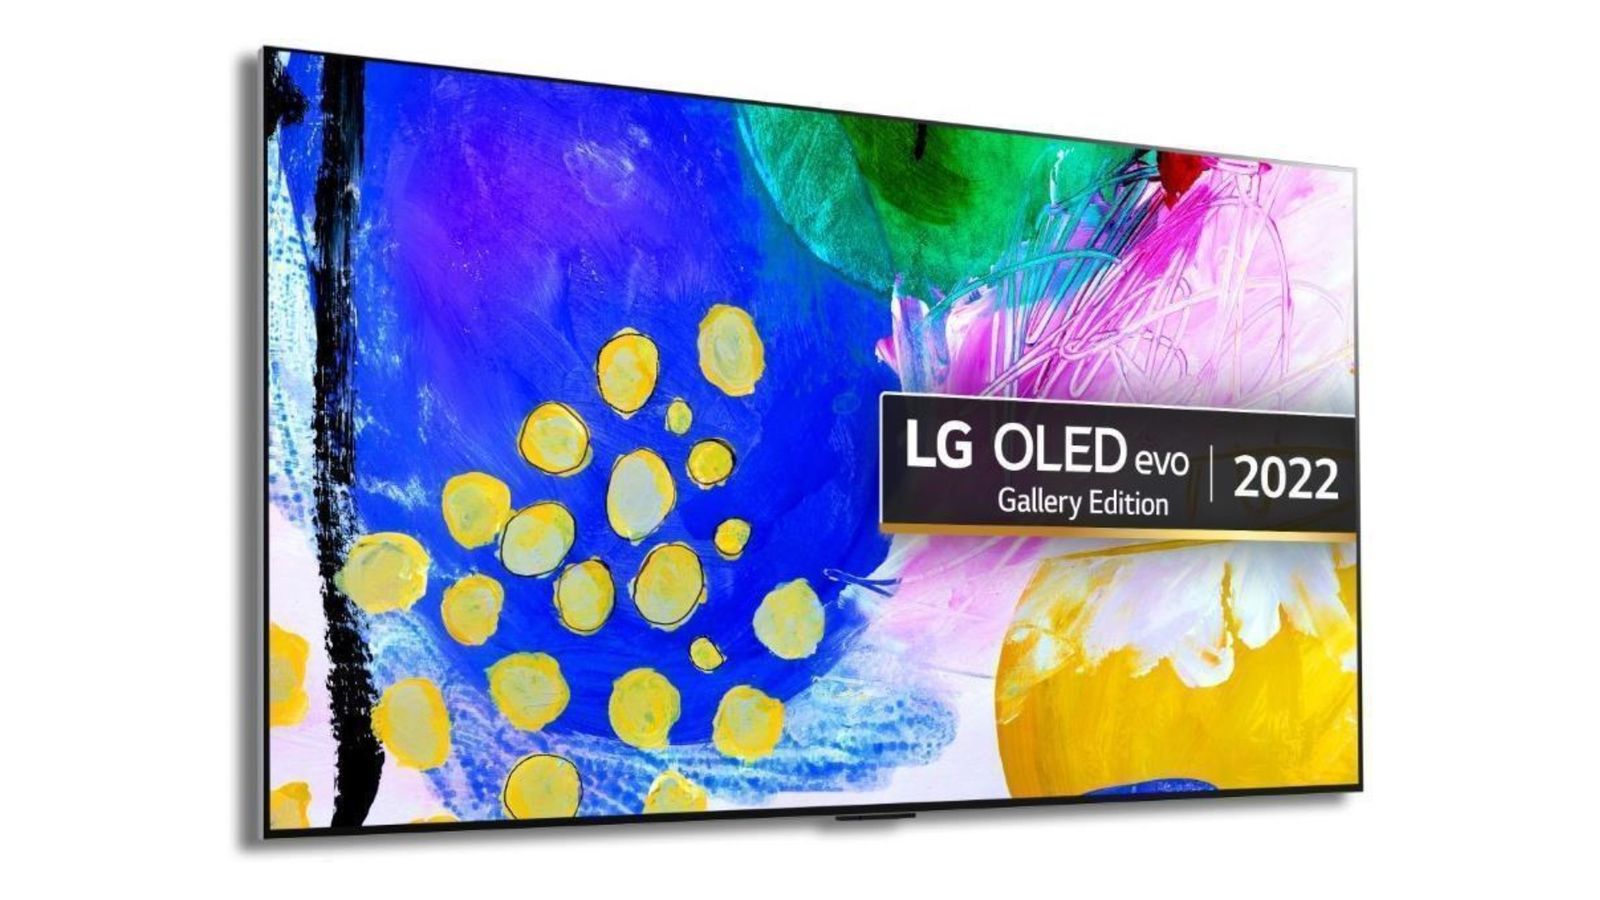 Best TV brands - LG G2 OLED product image of a flatscreen TV featuring a yellow, blue, pink, and green painted pattern on the display.